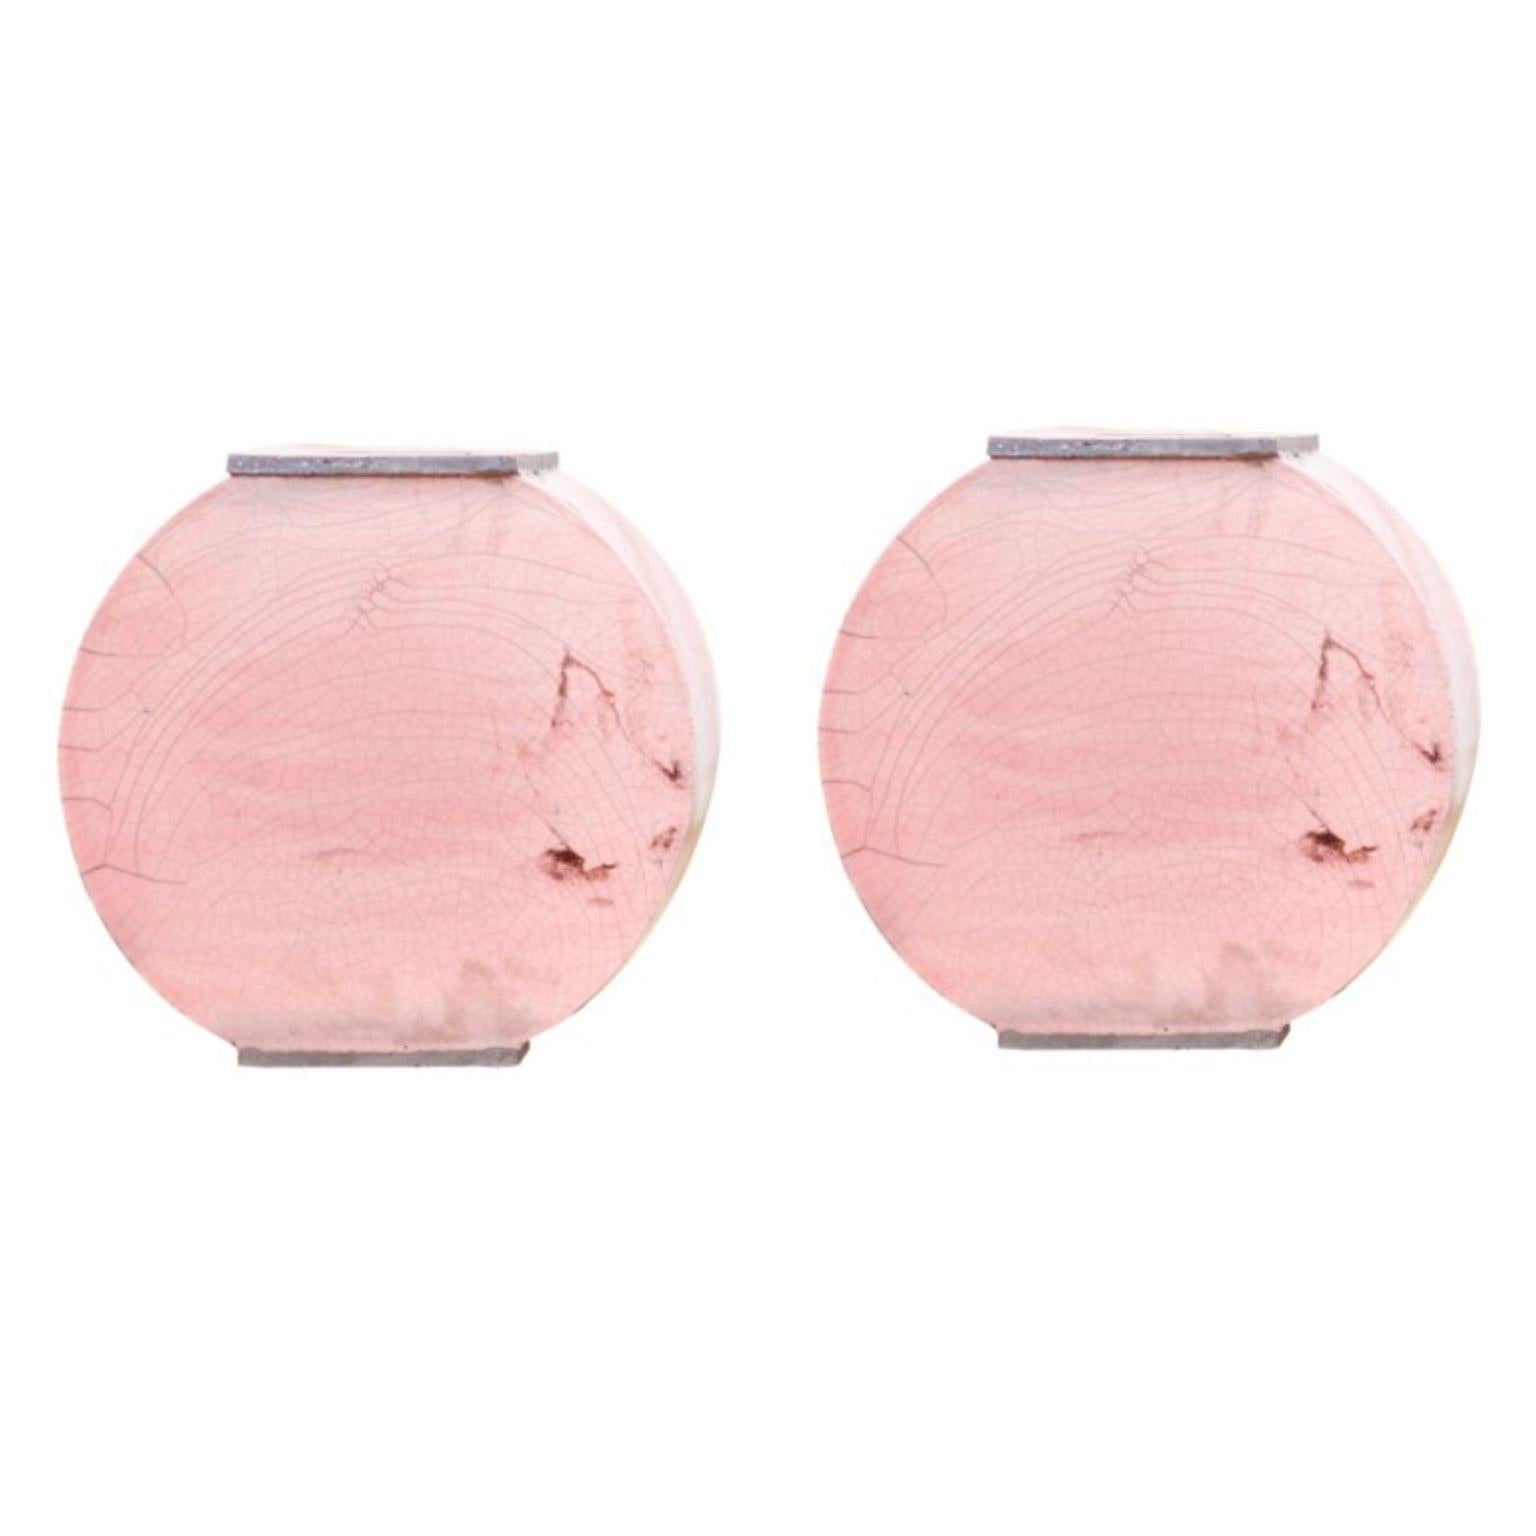 Set of 2 small pink vases by Doa Ceramics 
Dimensions: 3.5